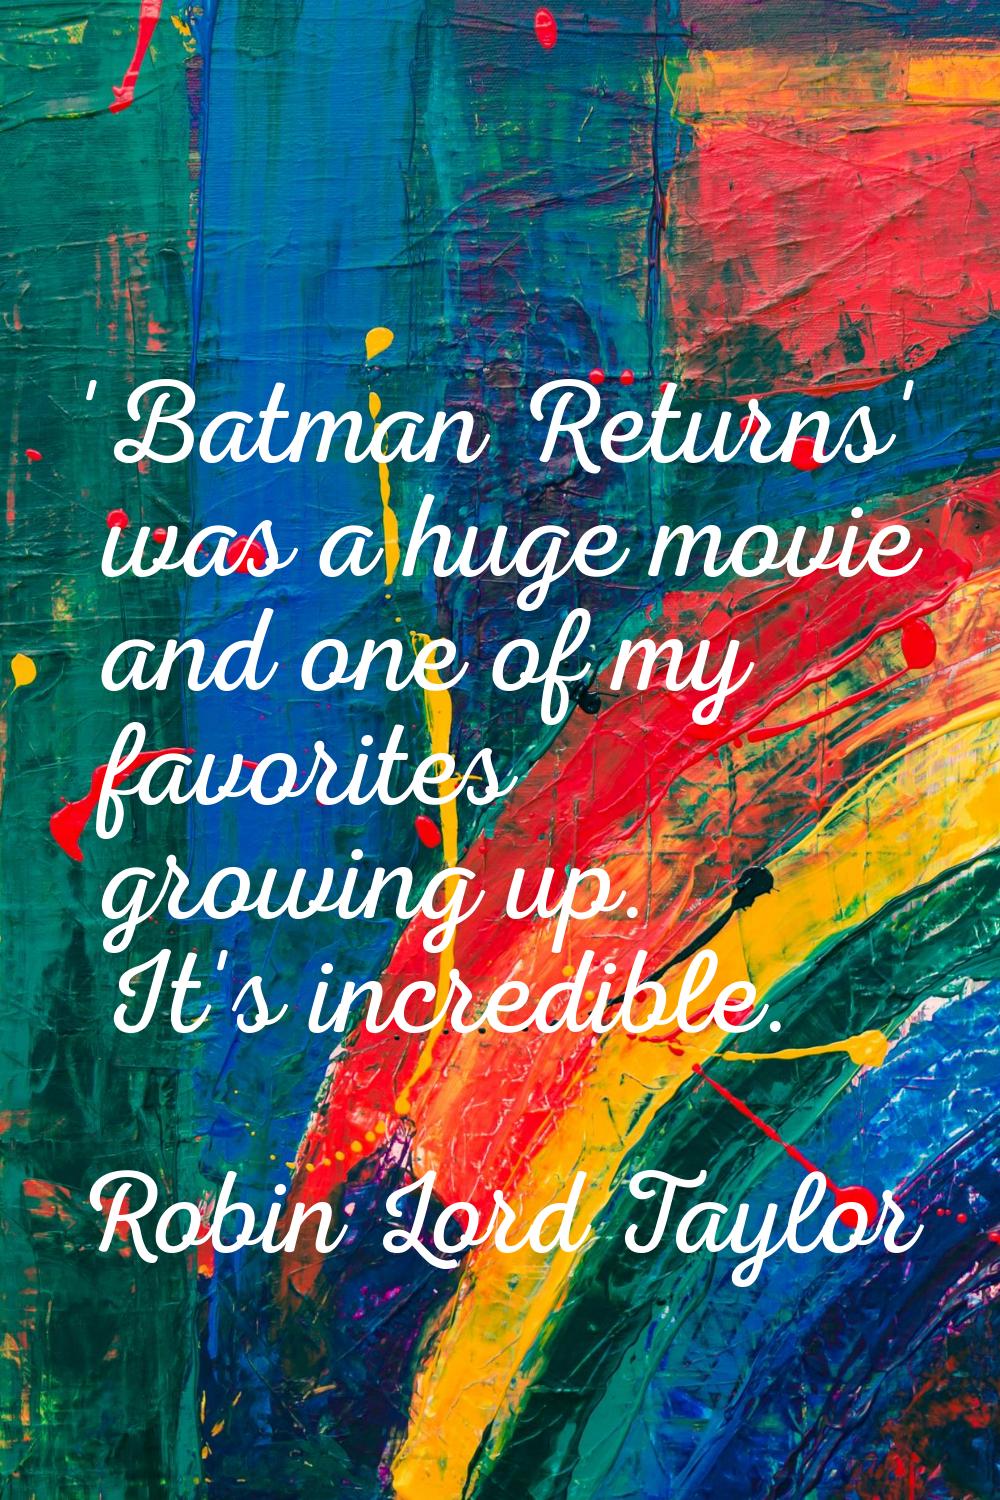 'Batman Returns' was a huge movie and one of my favorites growing up. It's incredible.